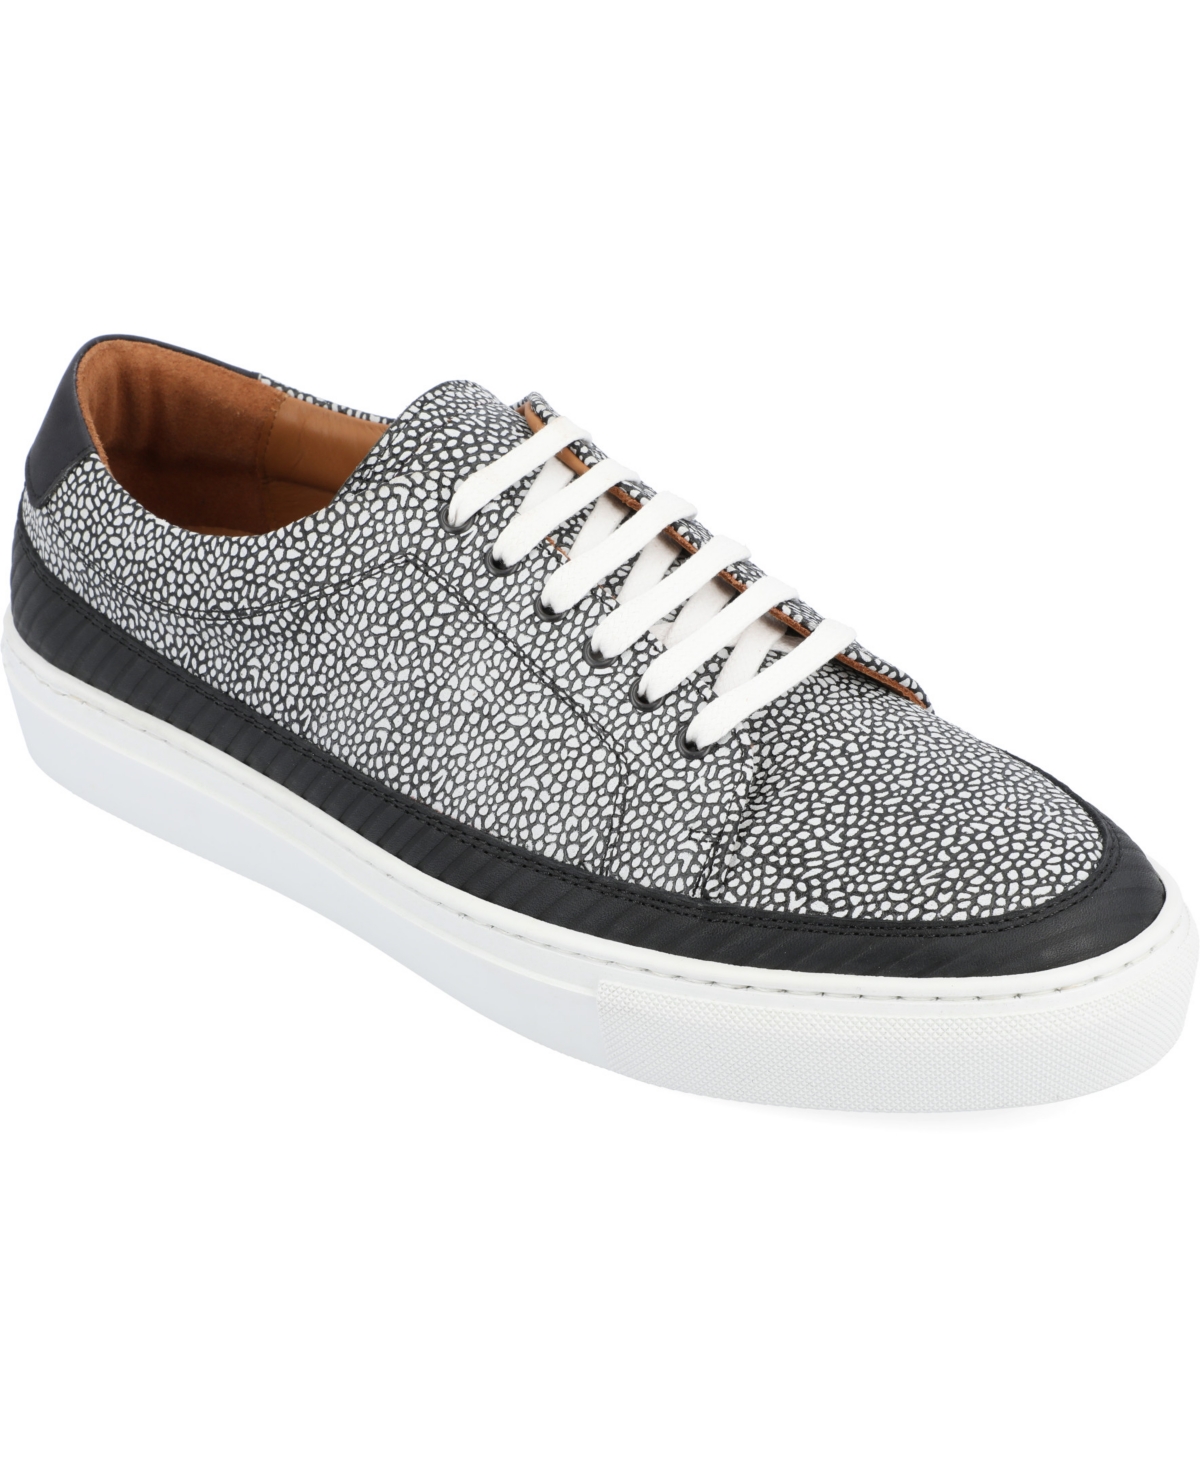 Men's Fifth Ave Handcrafted Custom English Leather Low Top Men's Casual Lace-up Sneaker - Stone